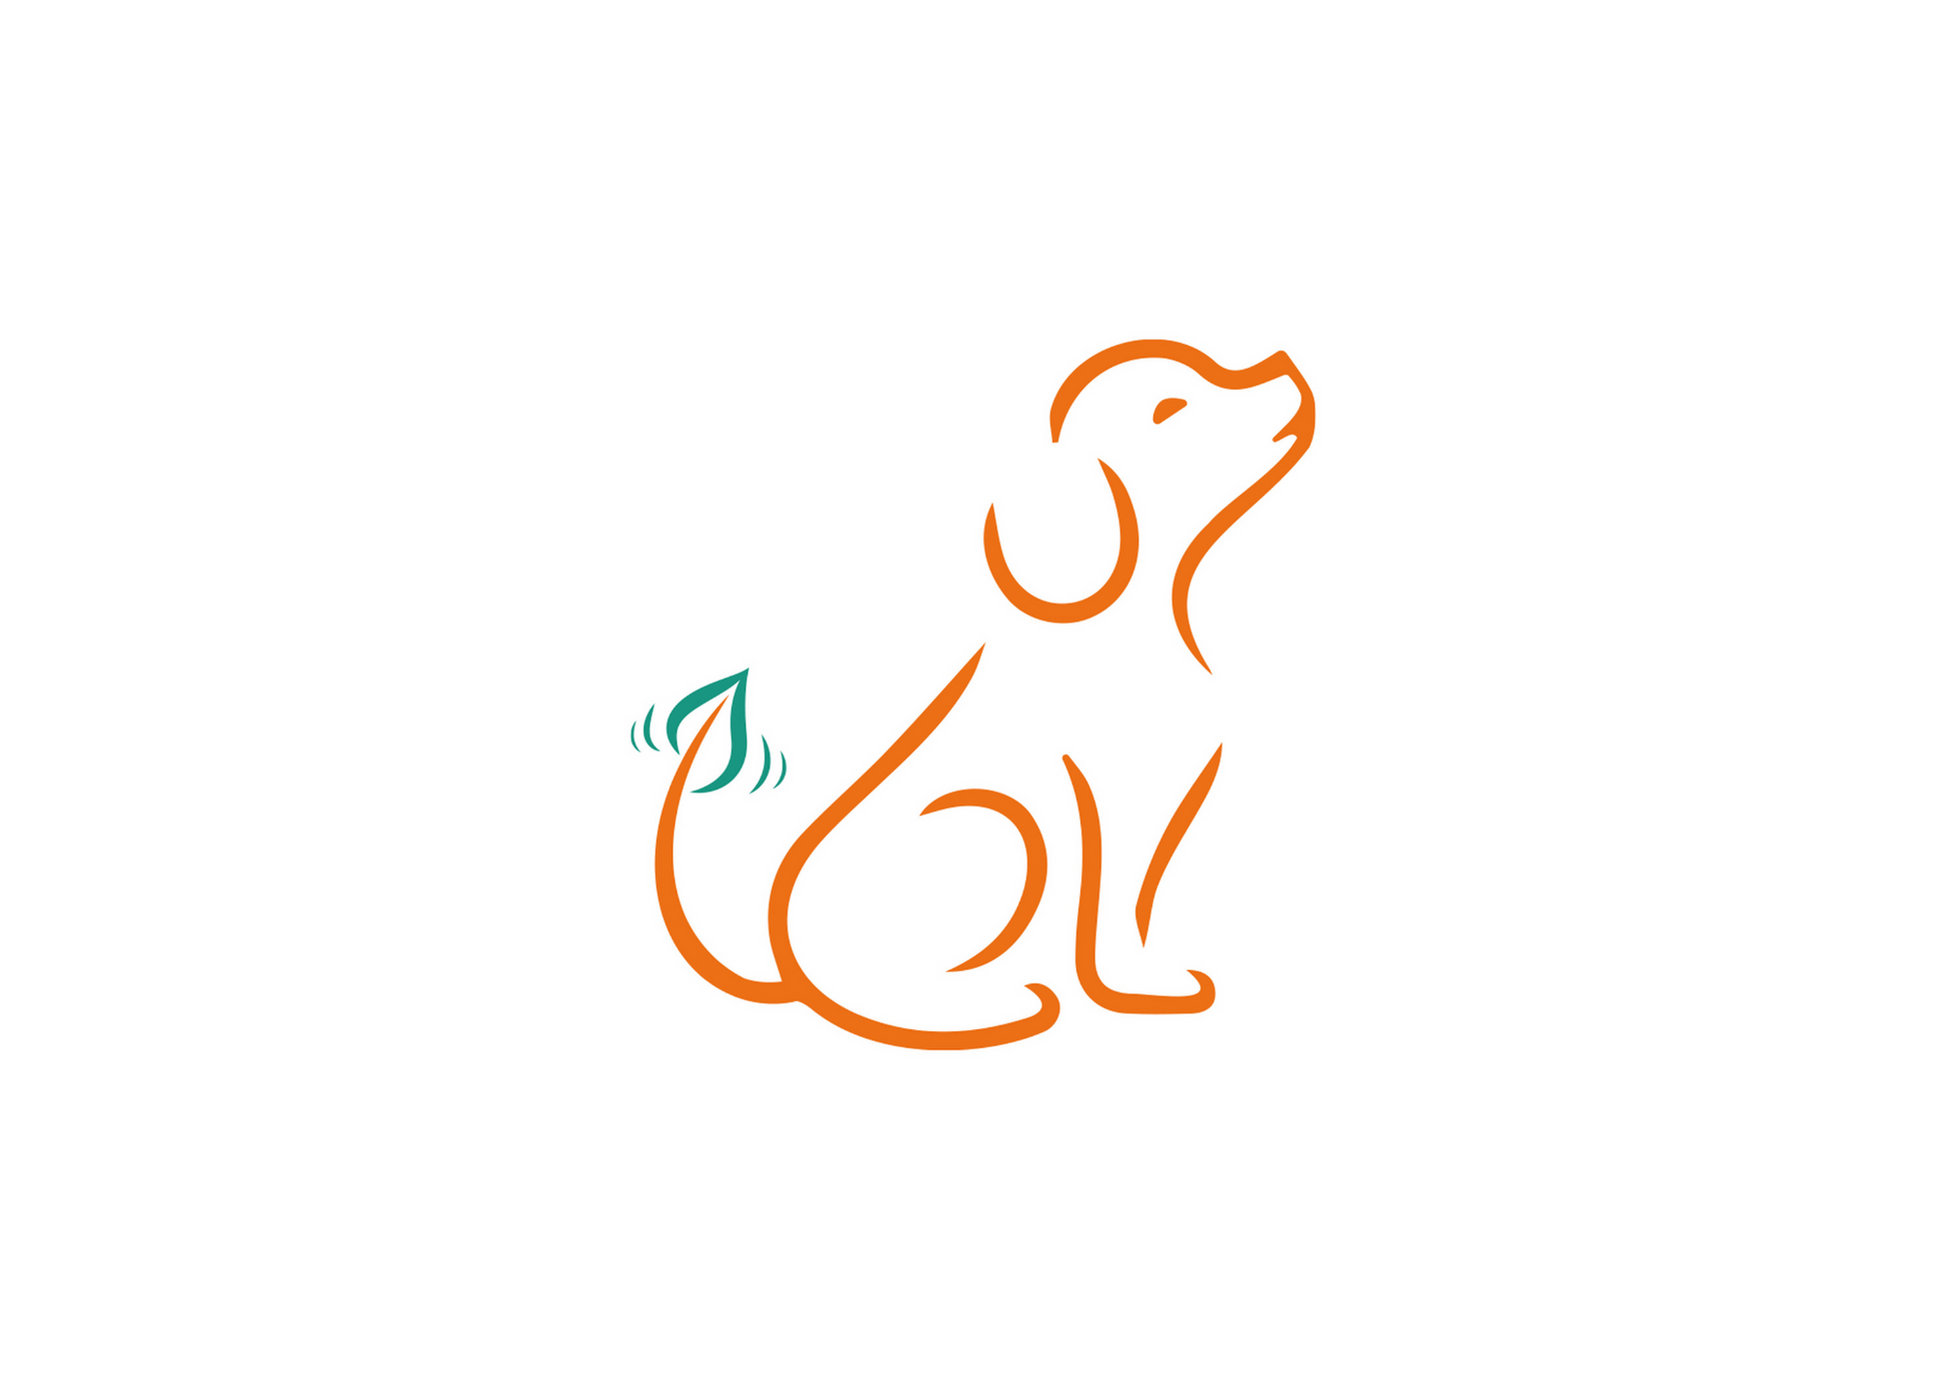 Image displaying Wagging Companions' logo, featuring a distinct orange dog silhouette with a lively green leaf at the tip of its wagging tail. The logo embodies Wagging Companions' dedication to providing delicious and healthy vegan dog treats.